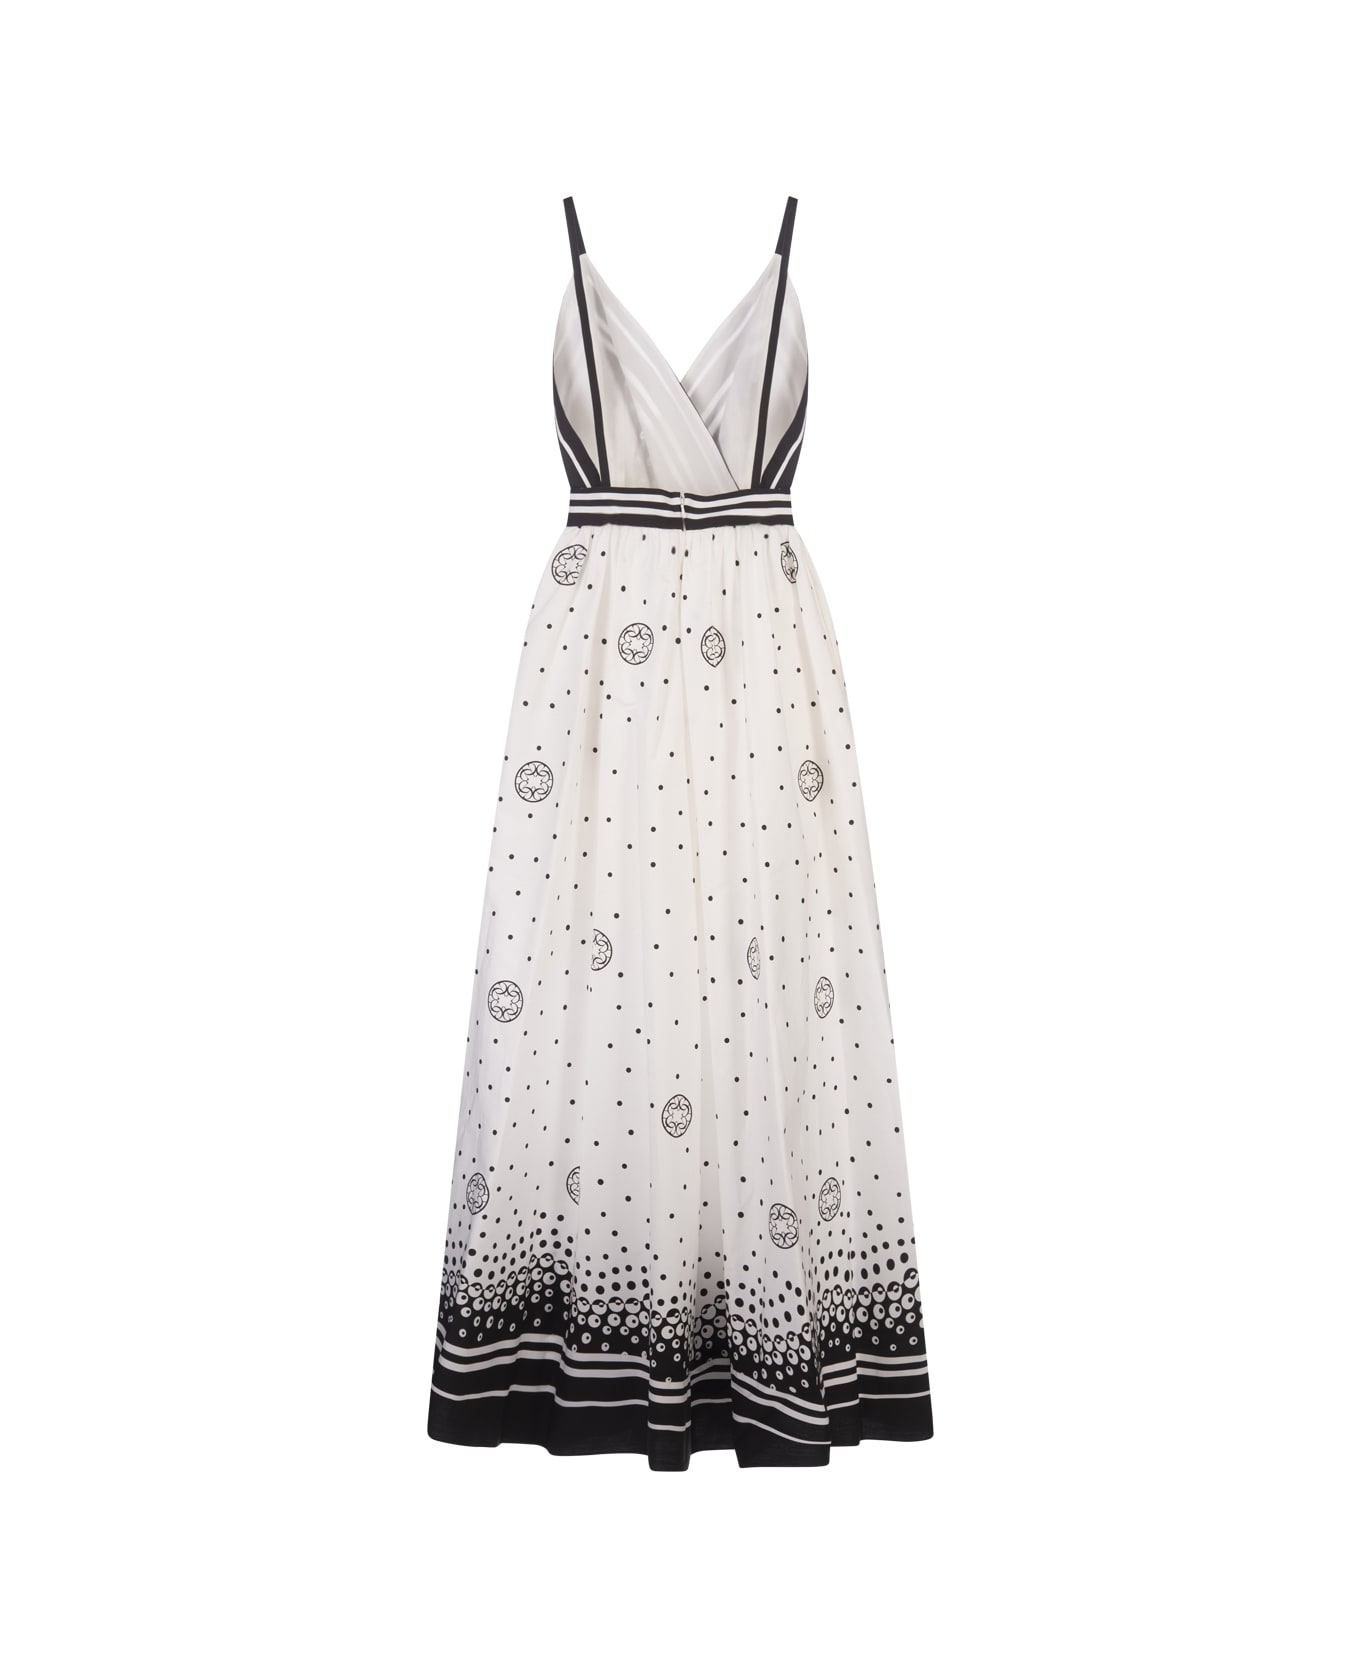 Elie Saab Moon Printed Cotton Dress In White And Black - White